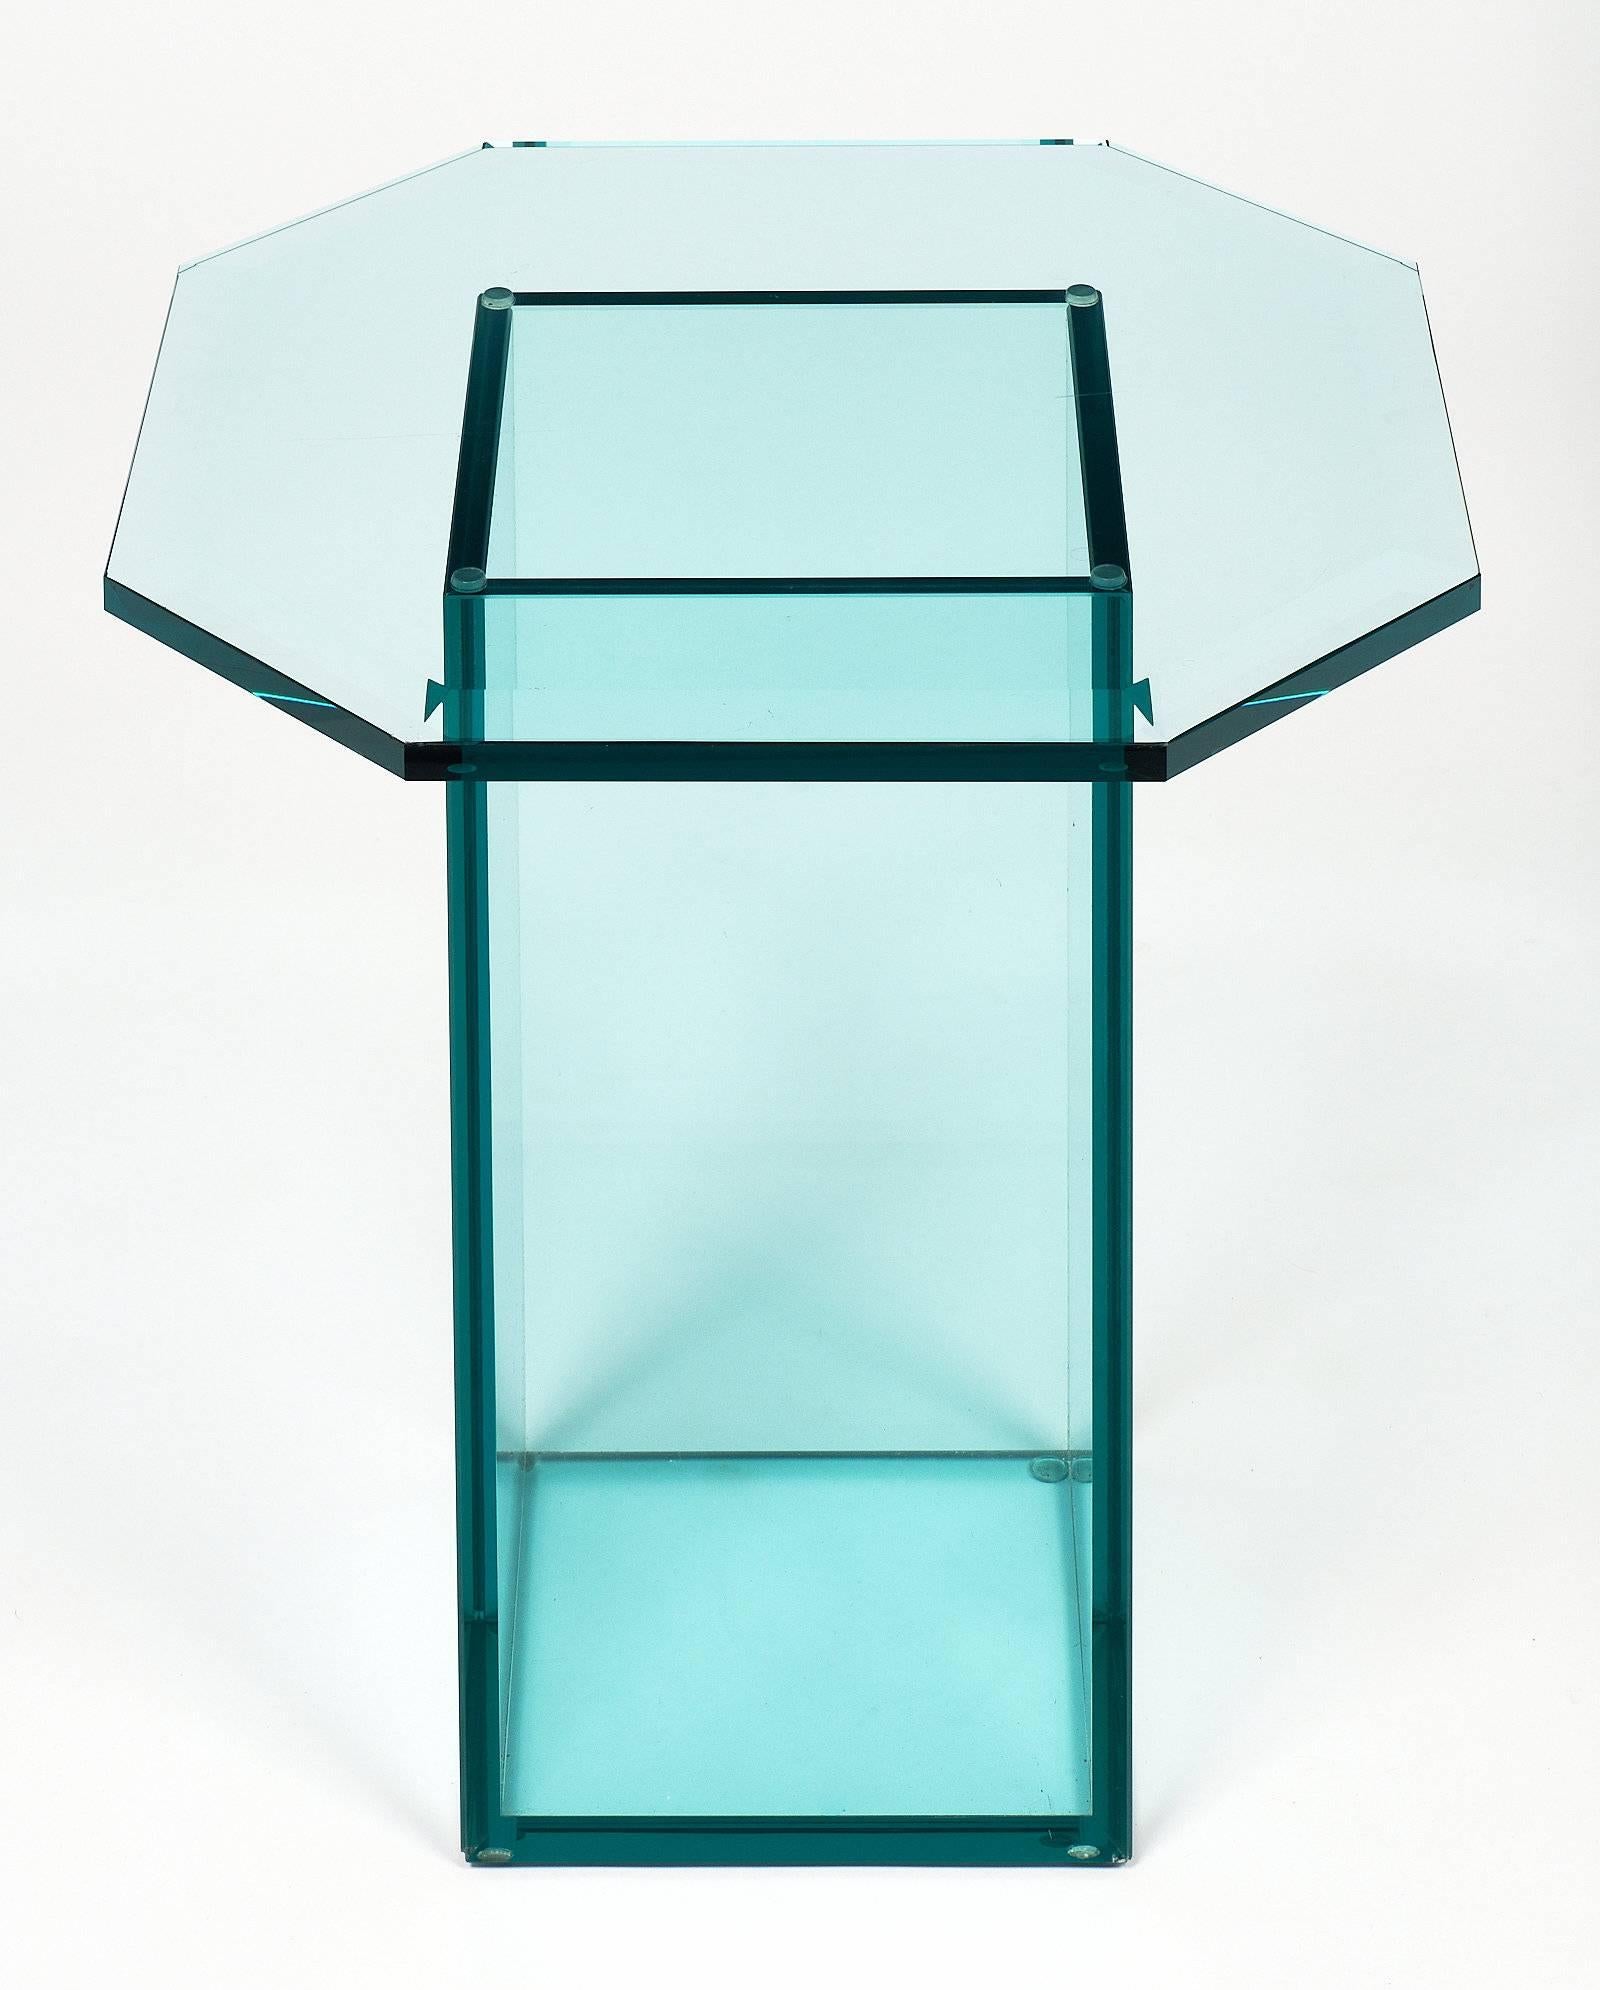 French vintage set of glass side tables with green tinted glass. They have a rectangular base and a bevelled octagonal top. They create a strong design with an airy look.